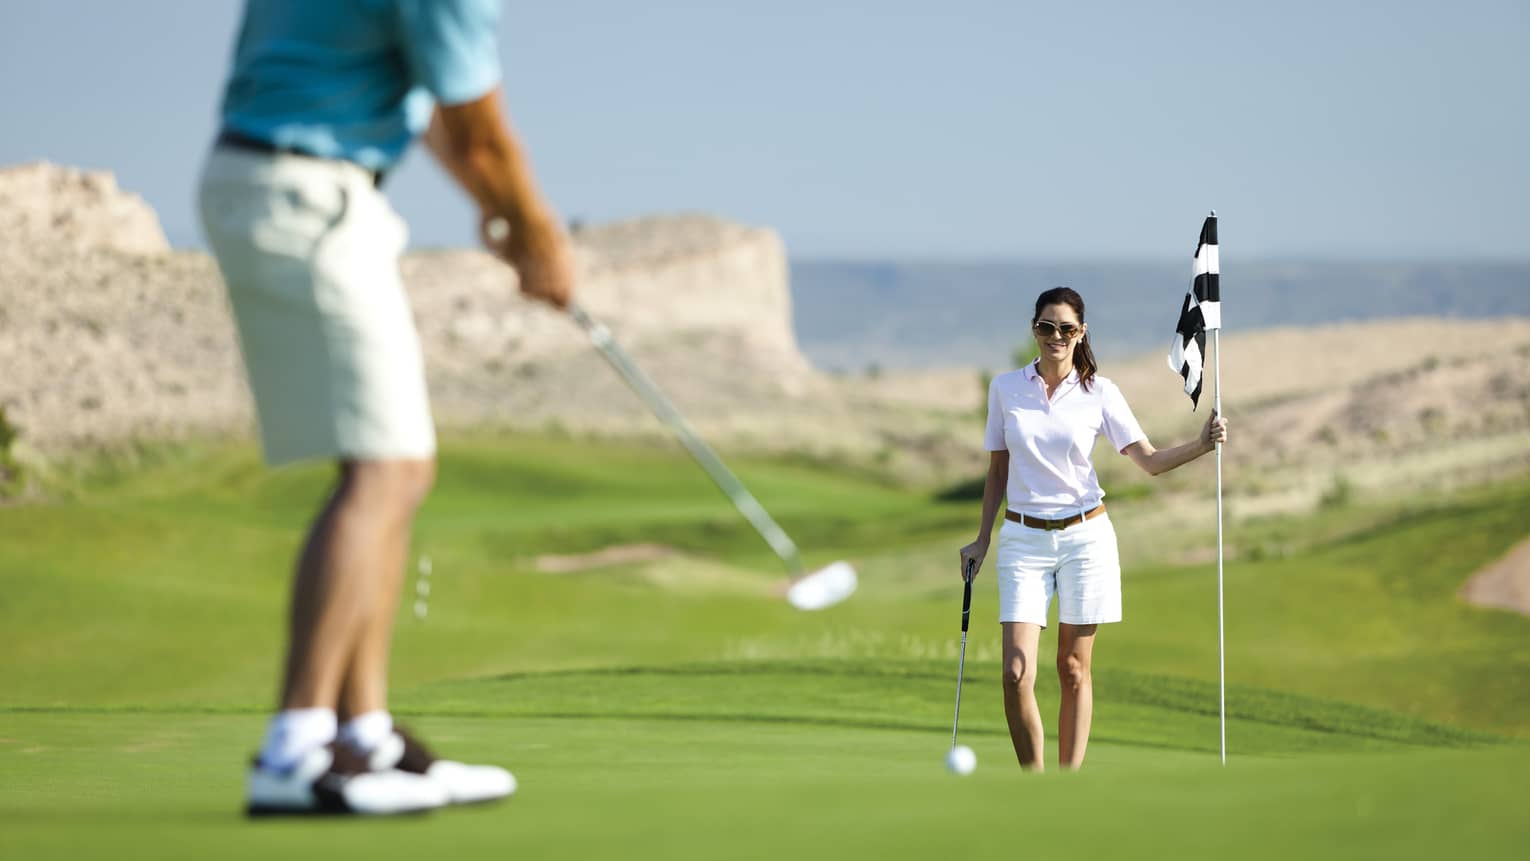 Woman holds golf flag near hole as man putts on course green